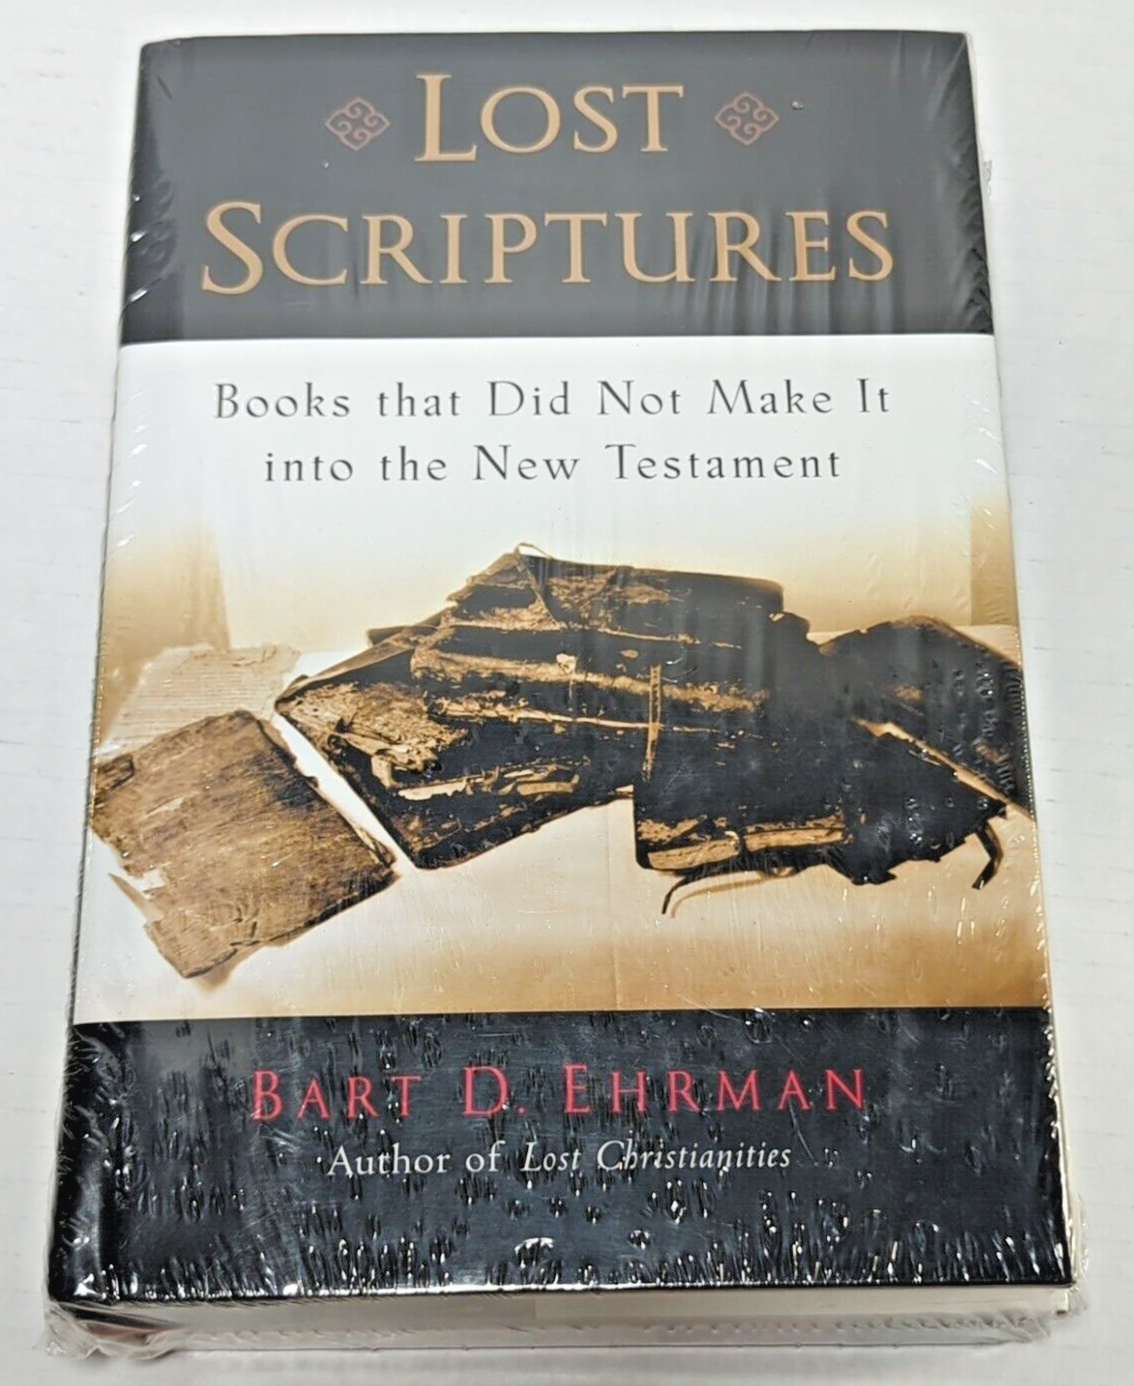 Primary image for Lost Scriptures  and Lost Christianities by Bart D. Ehrman - New book Set